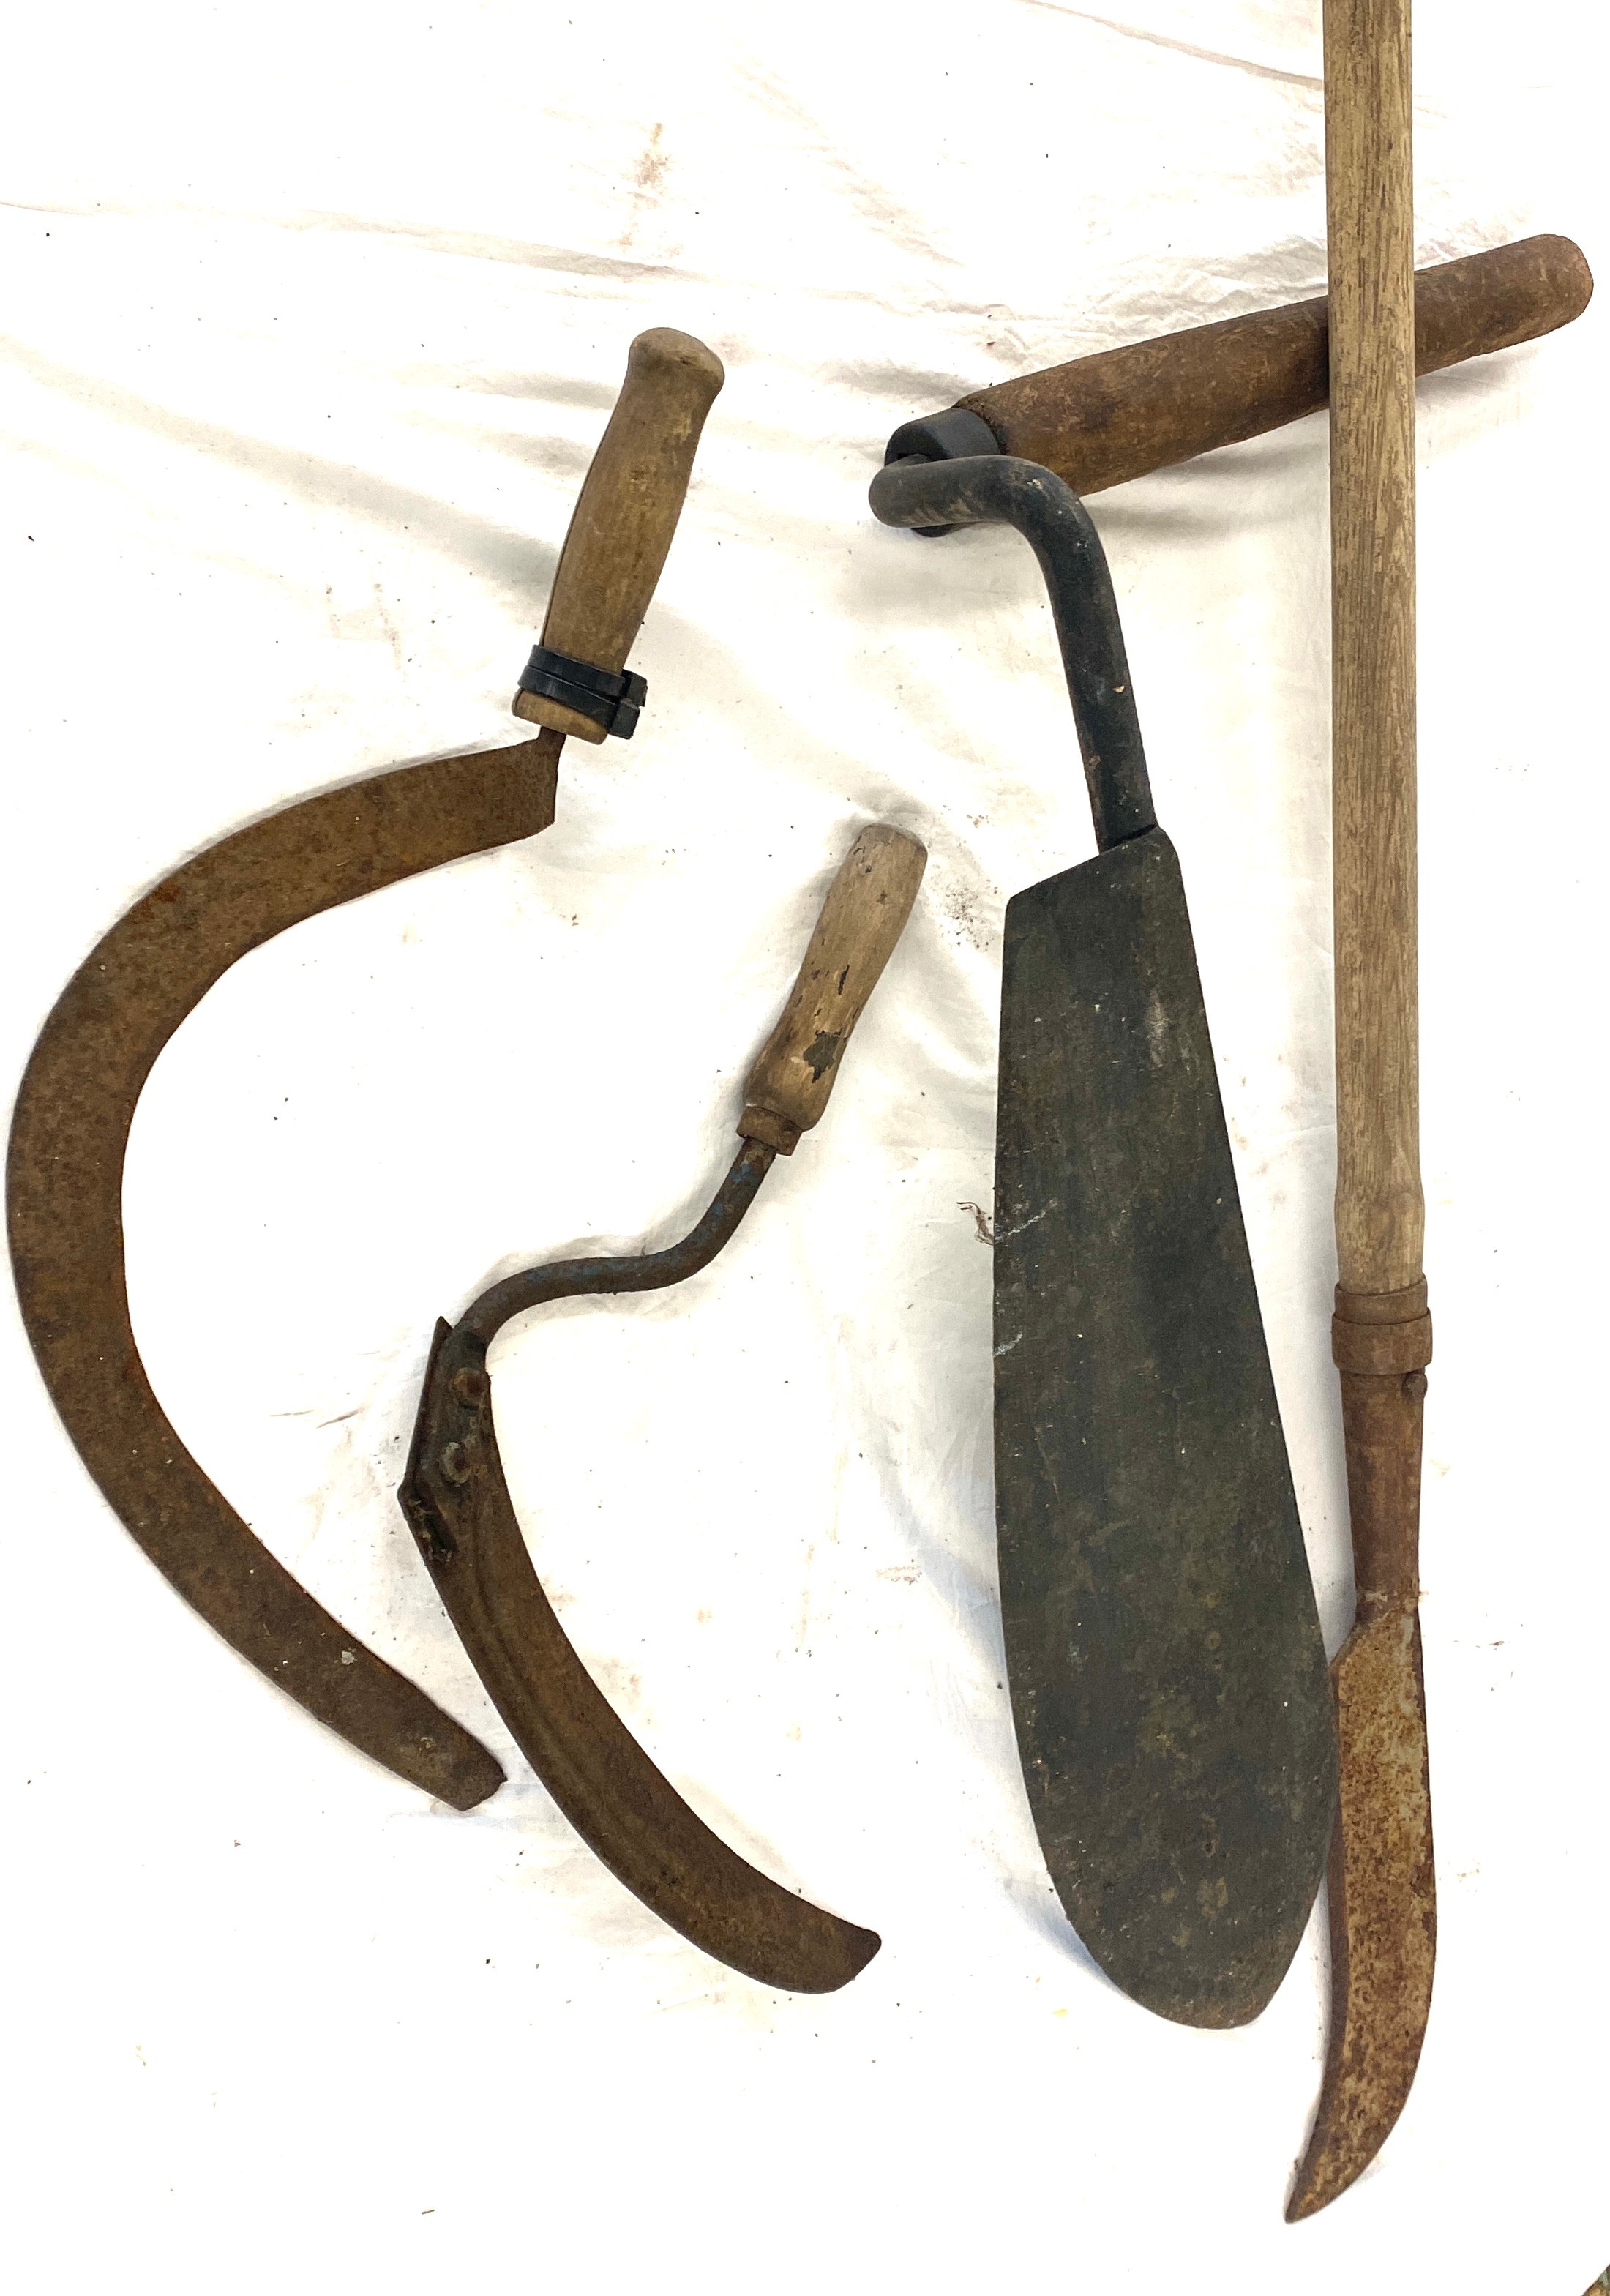 Selection of vintage grass cutting implements